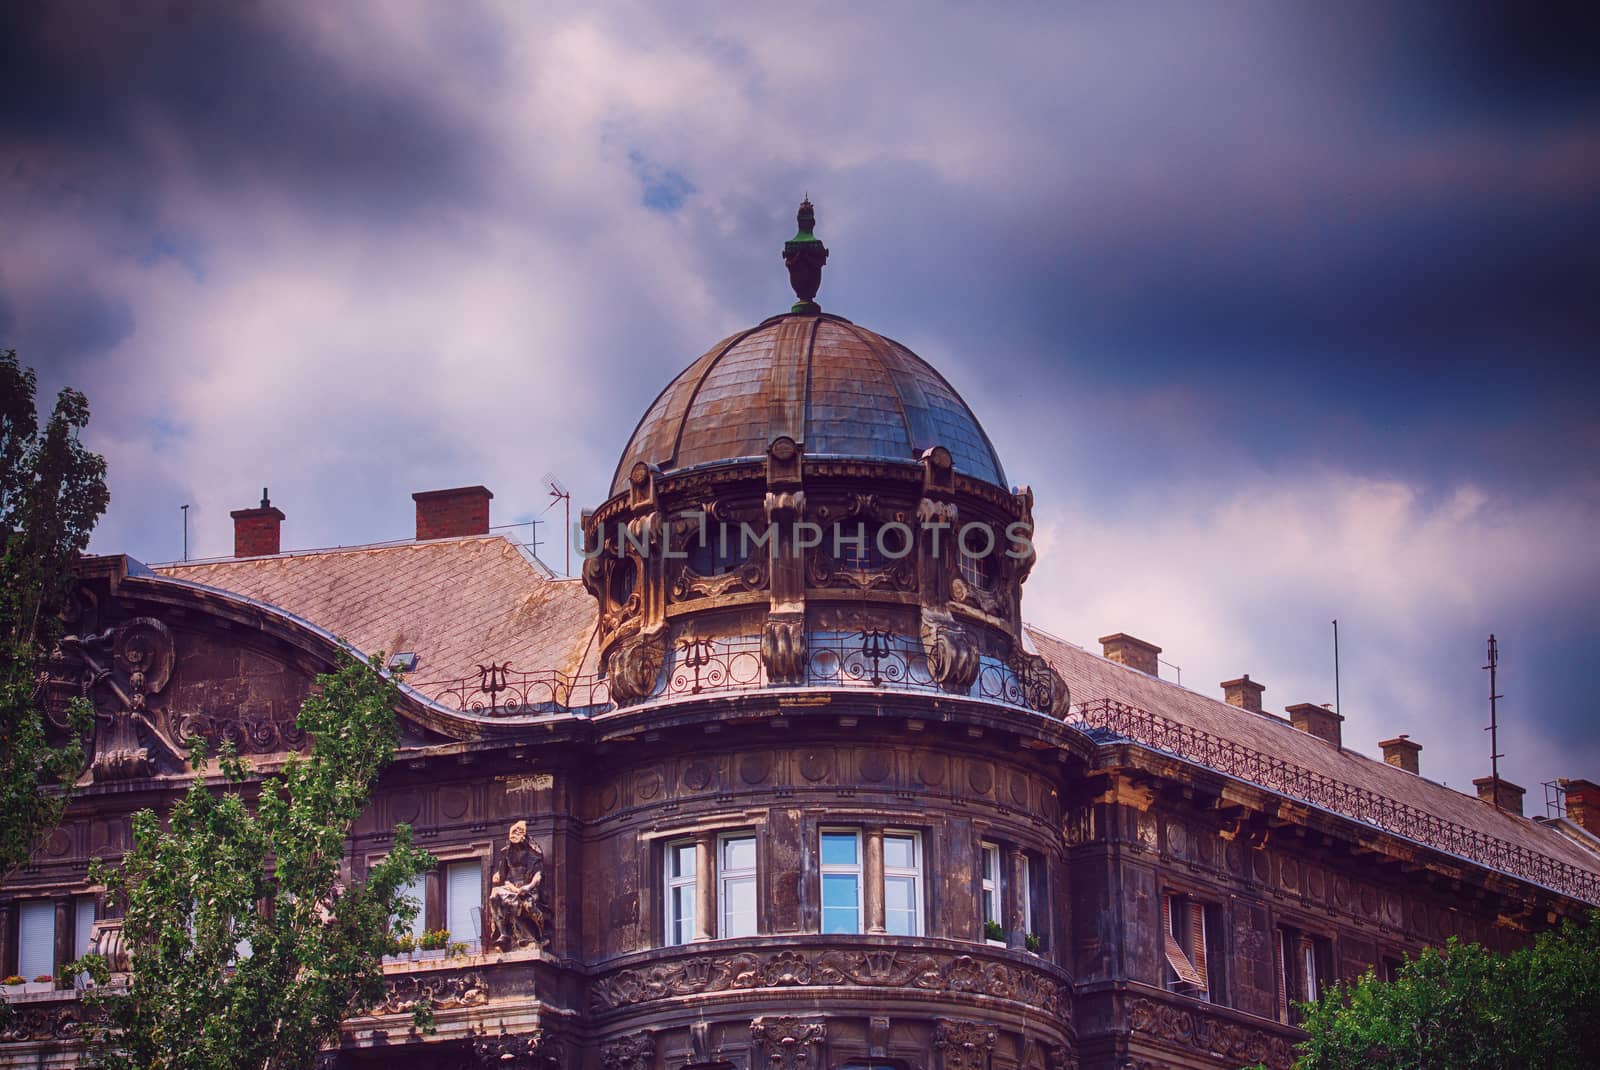 Beautiful domed old building in Budapest with dark blue stormy clouds in the background. The calm before the storm in Budapest.